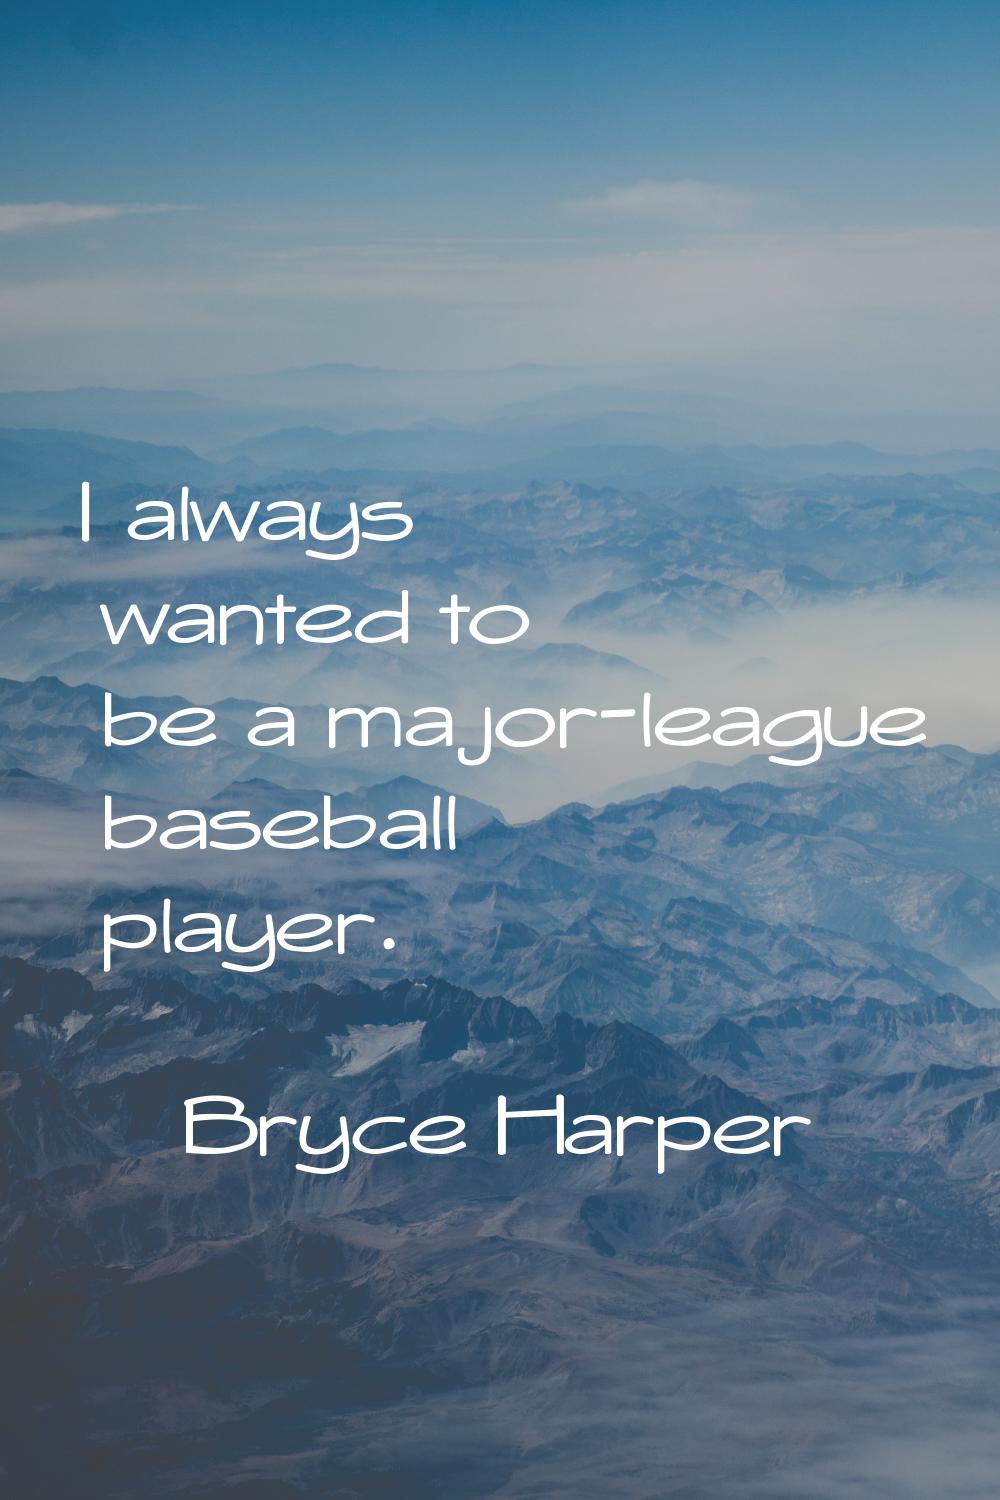 I always wanted to be a major-league baseball player.